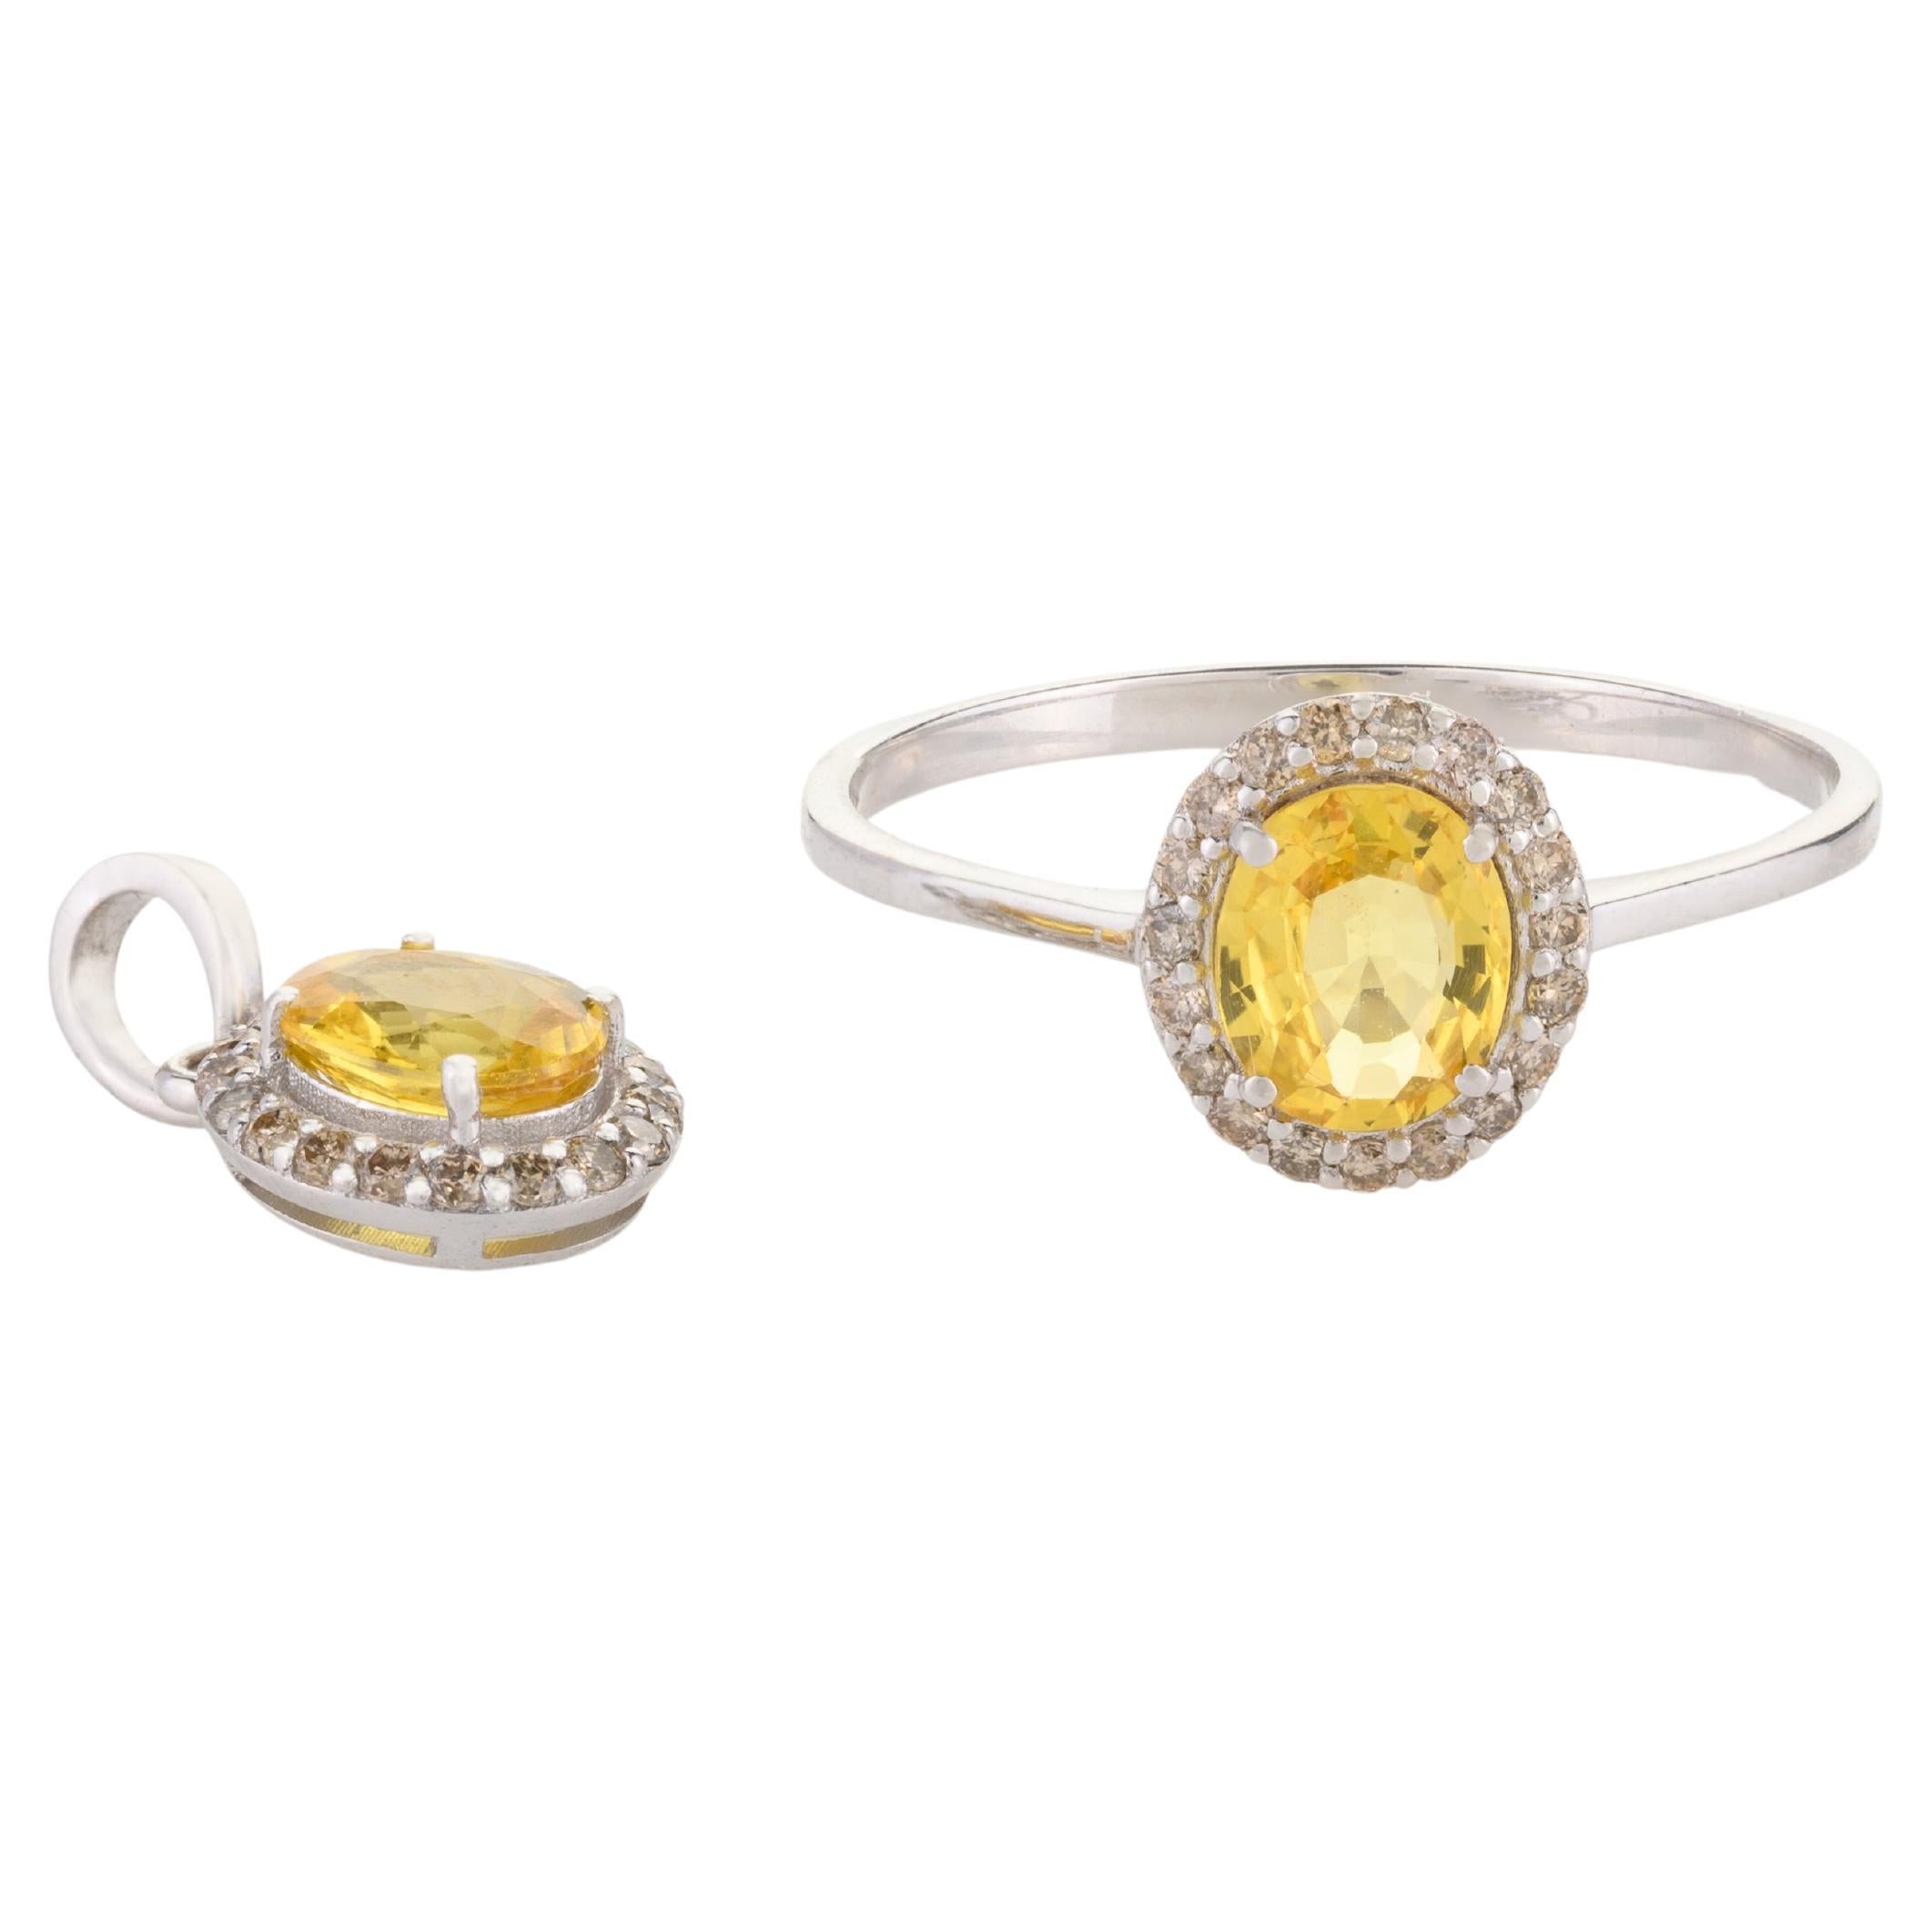 For Sale:  18k White Gold Yellow Sapphire Halo Diamond Ring and Pendant Jewelry Set for Her